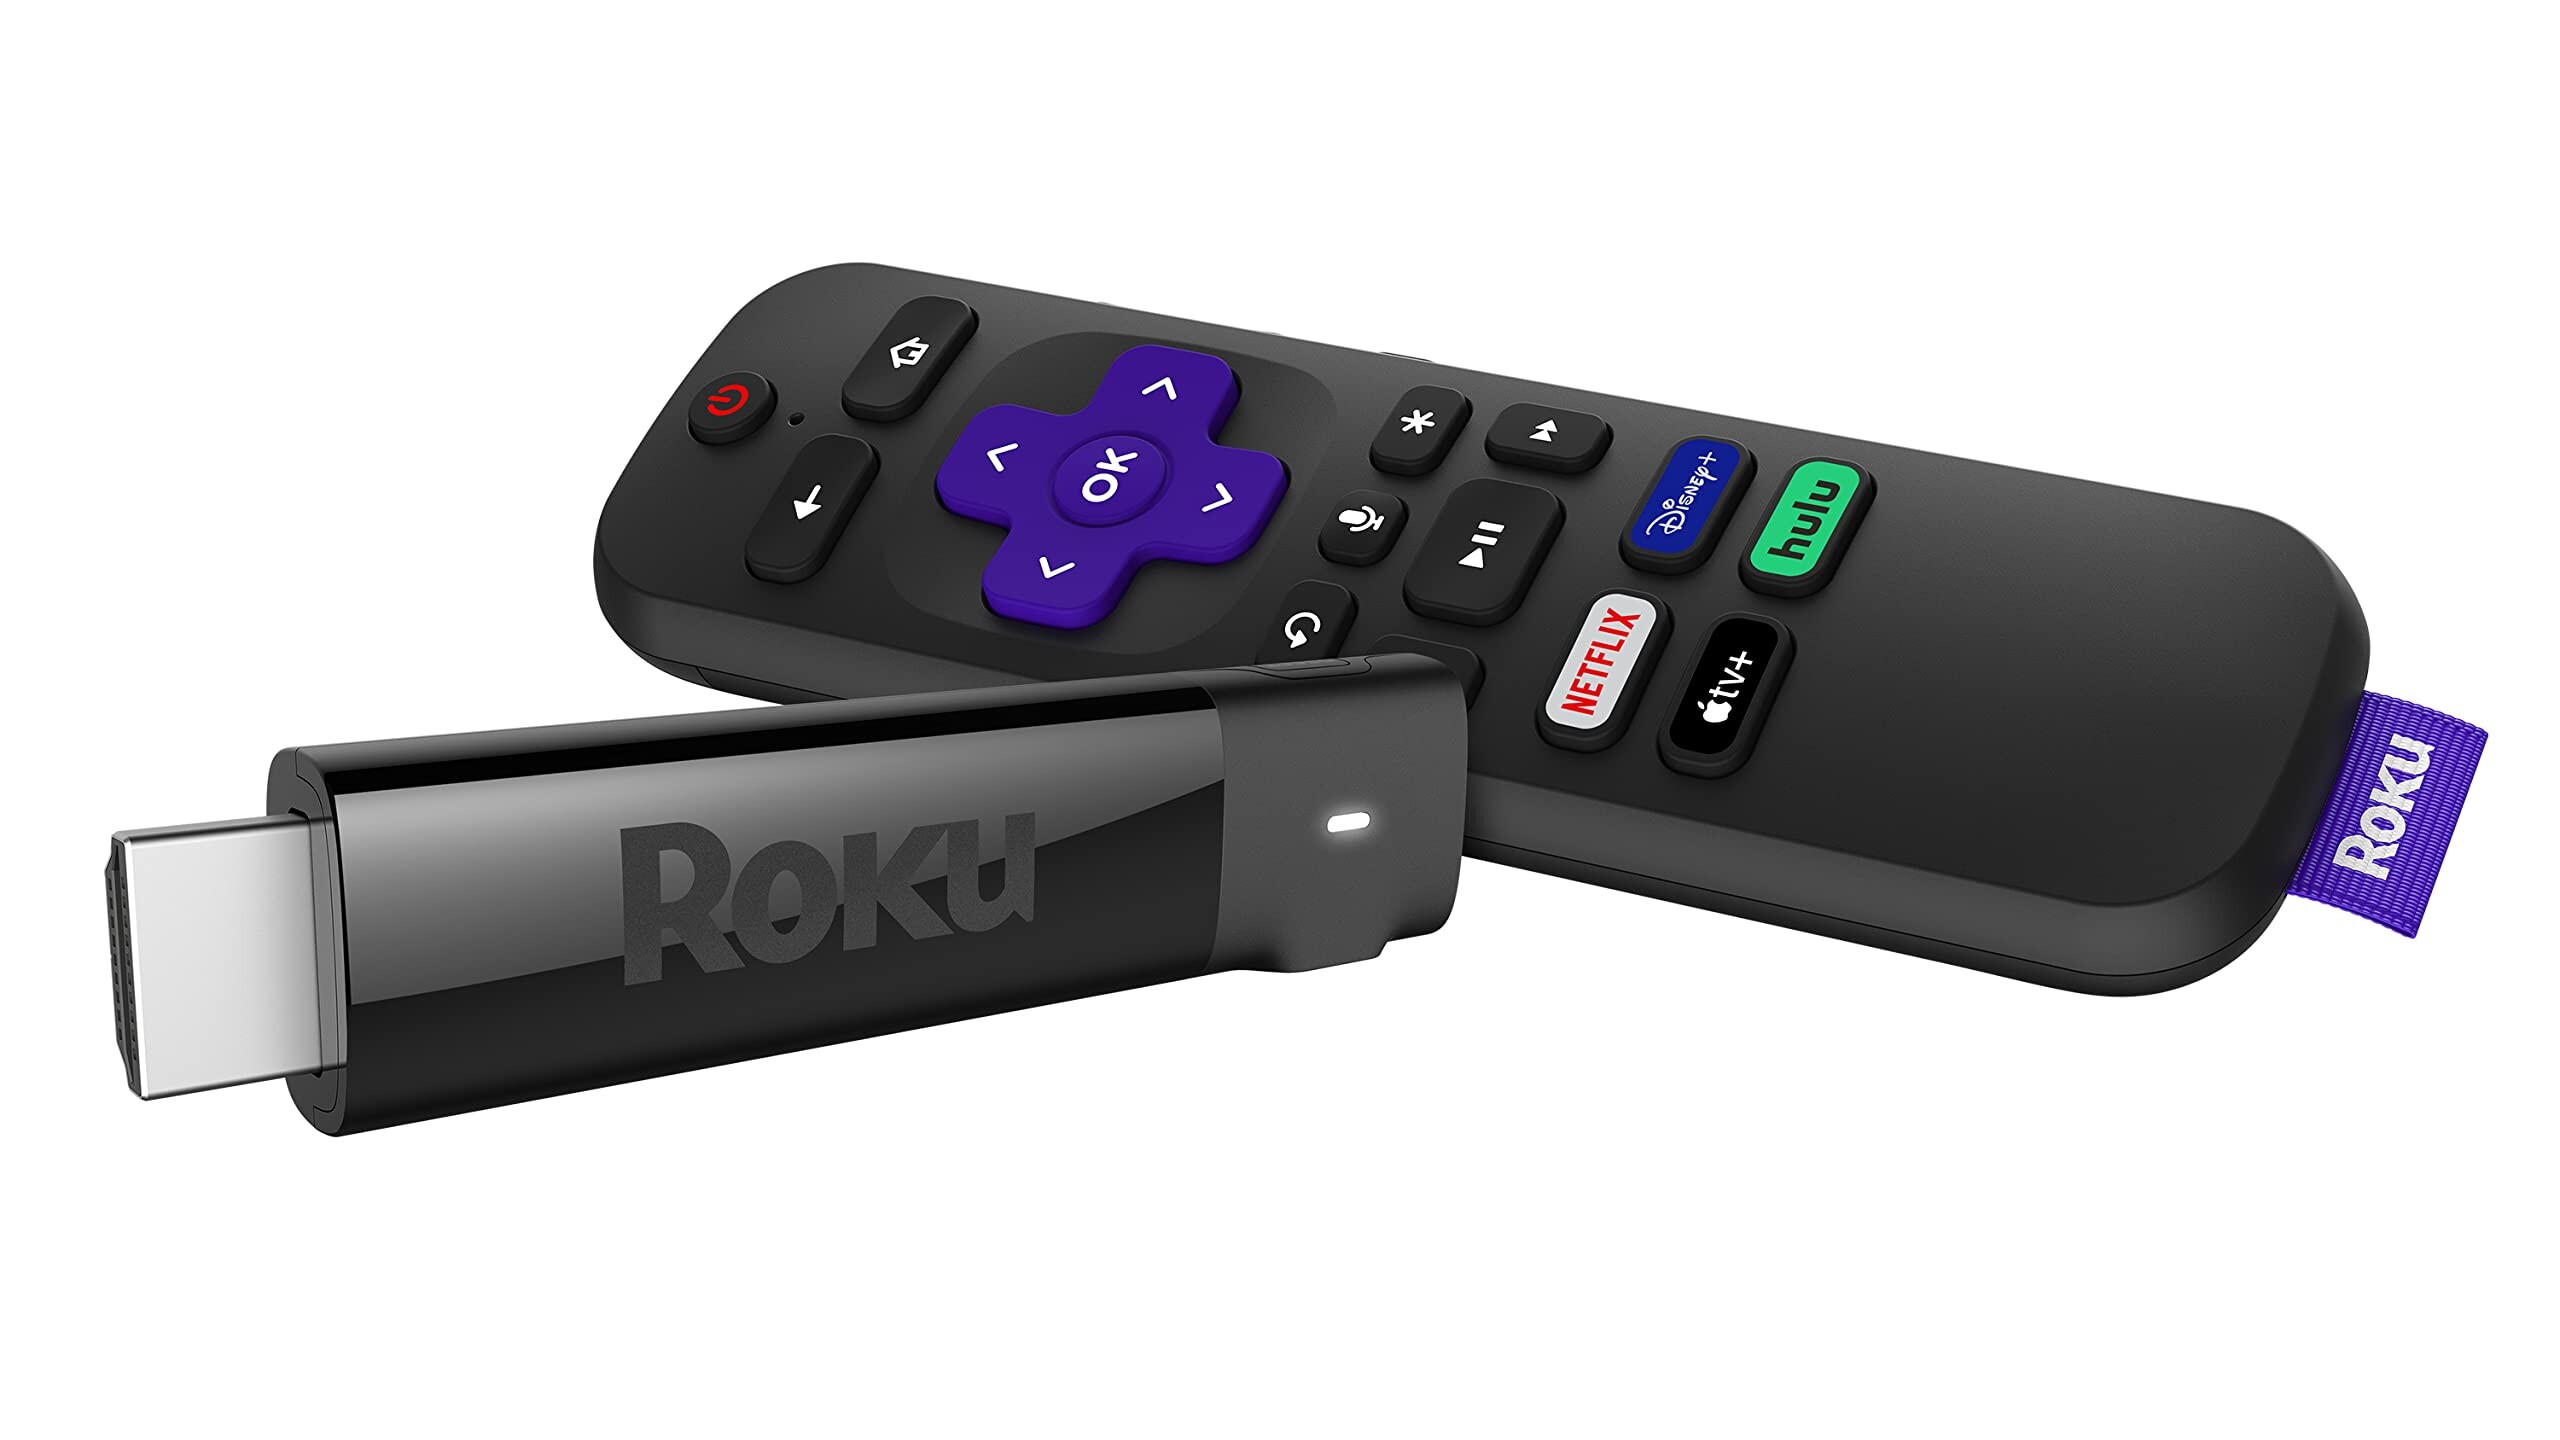 Roku Stick - How to Use a Phone as a TV Remote?